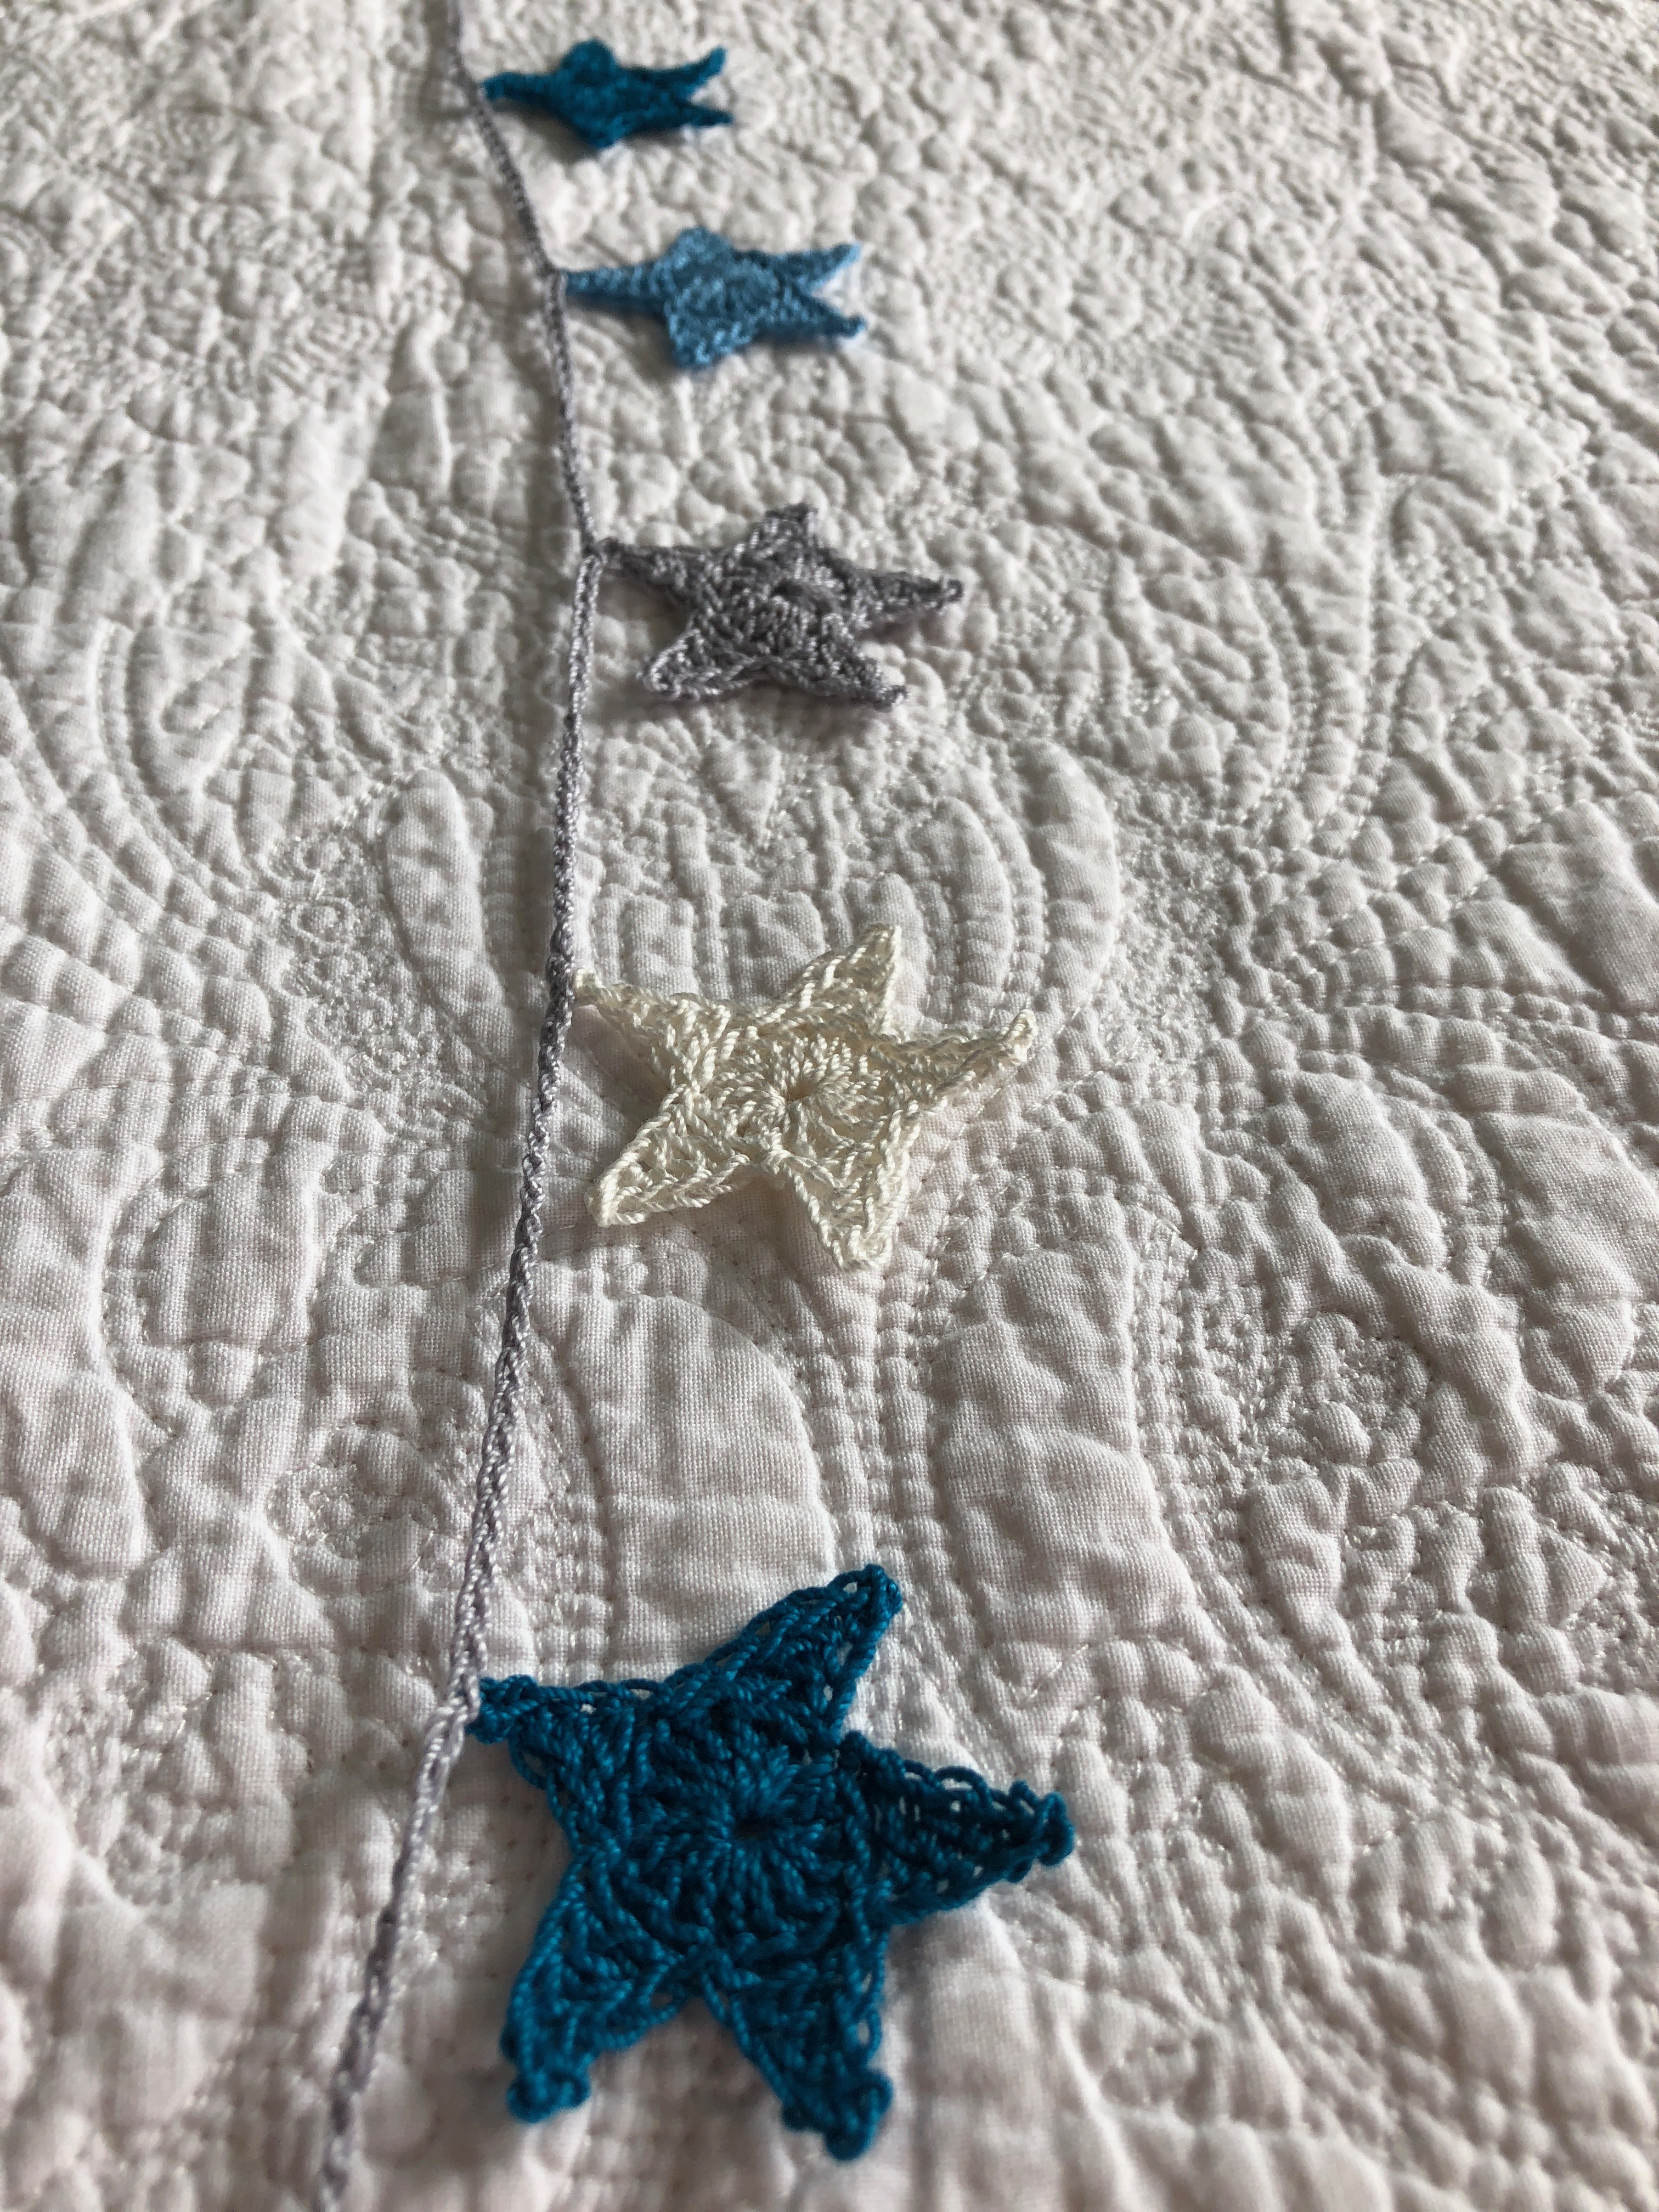 A small hand crocheted cotton star garland in petrol blue, mid blue, grey and white with a grey crocheted cord.